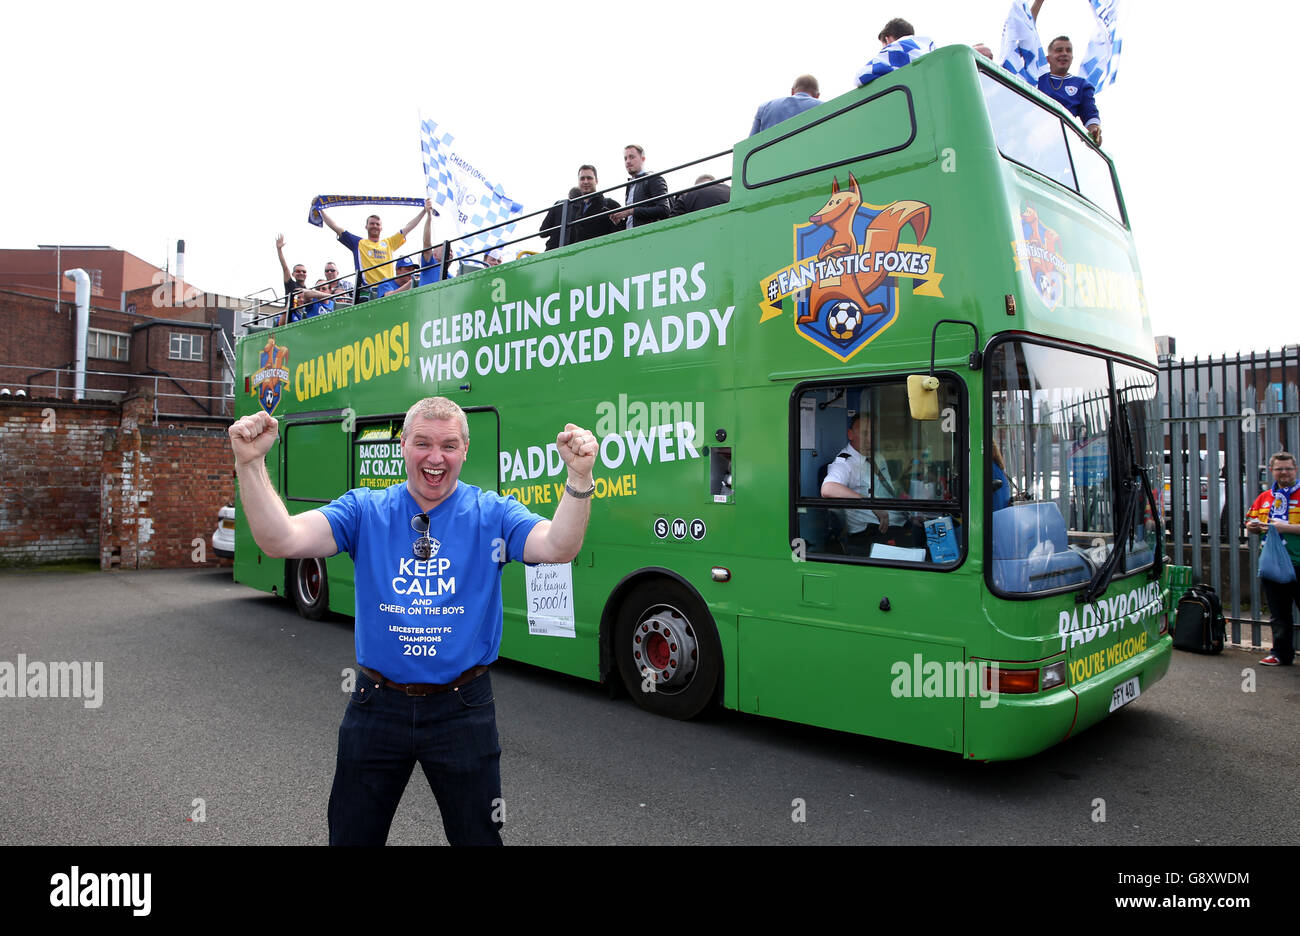 Leicester City Fans After Winning The 2015-16 Barclays Premier League. Paddy Power celebrates prior to the bus leaving in Leicester City Centre. Stock Photo